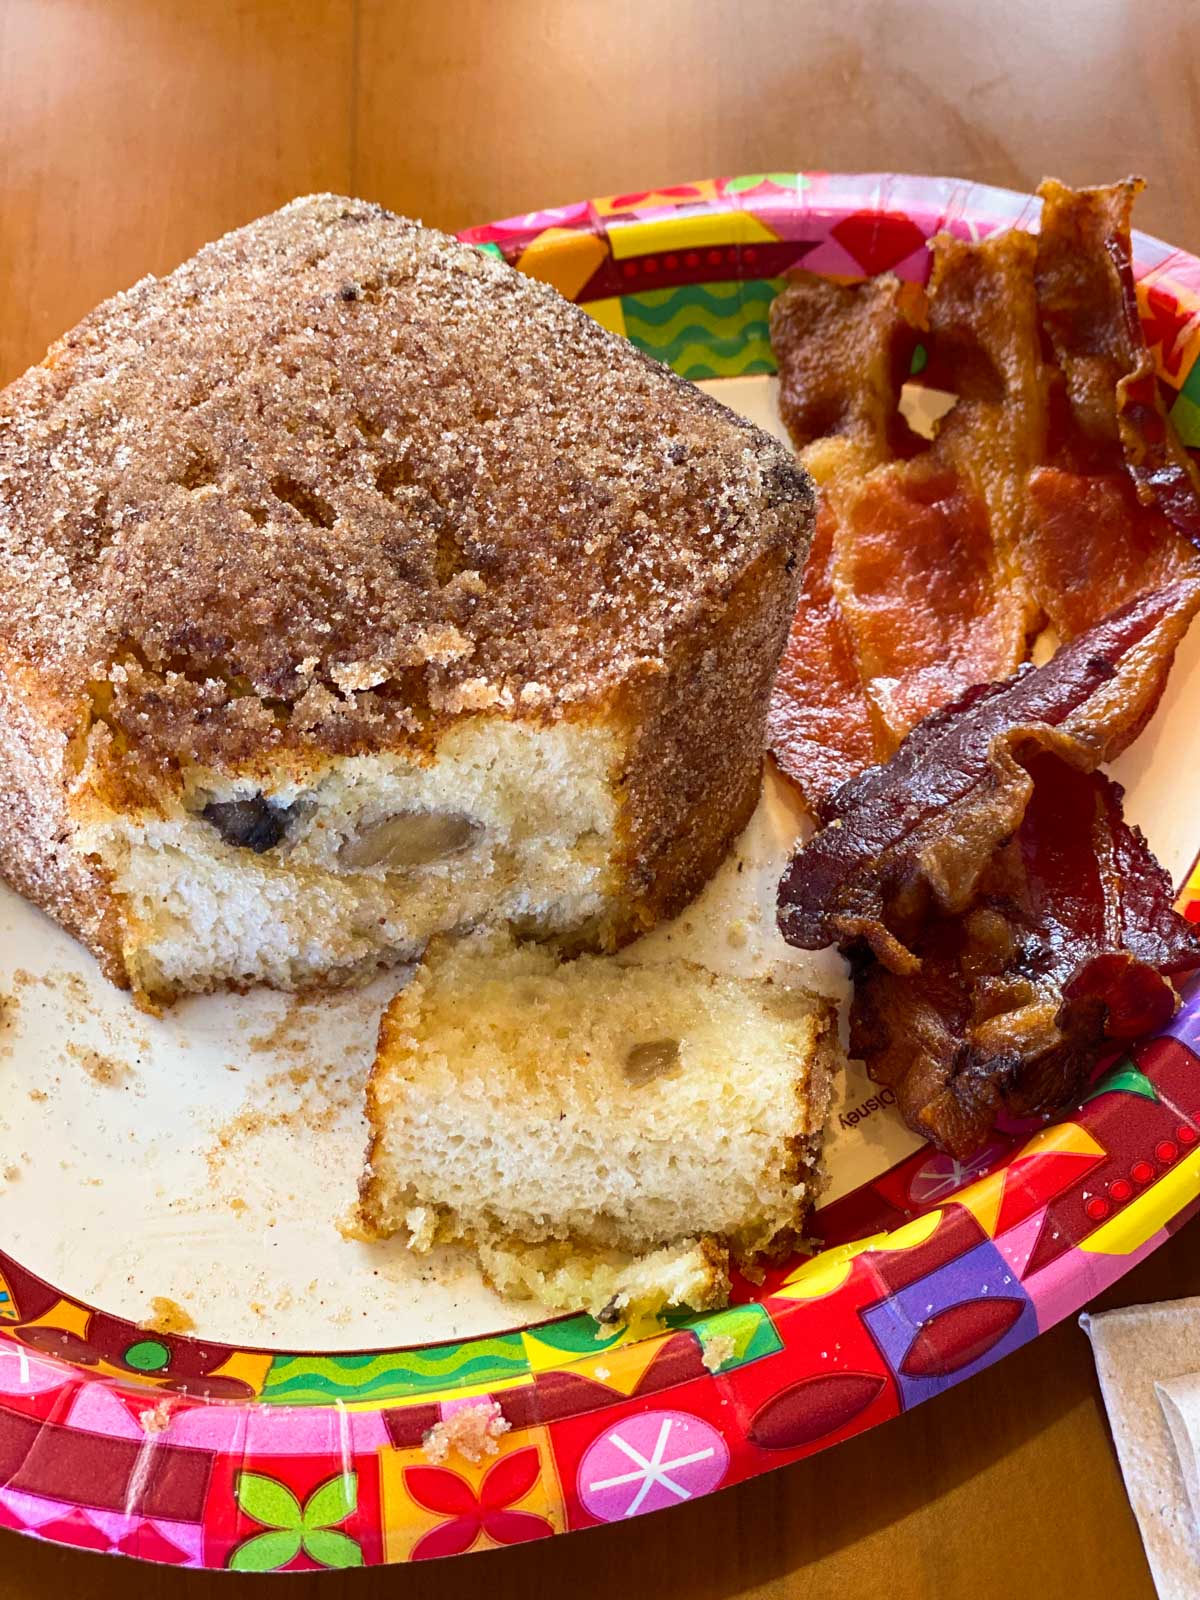 A breakfast platter with fried French toast is cut open to see the bananas inside. Bacon on the side.